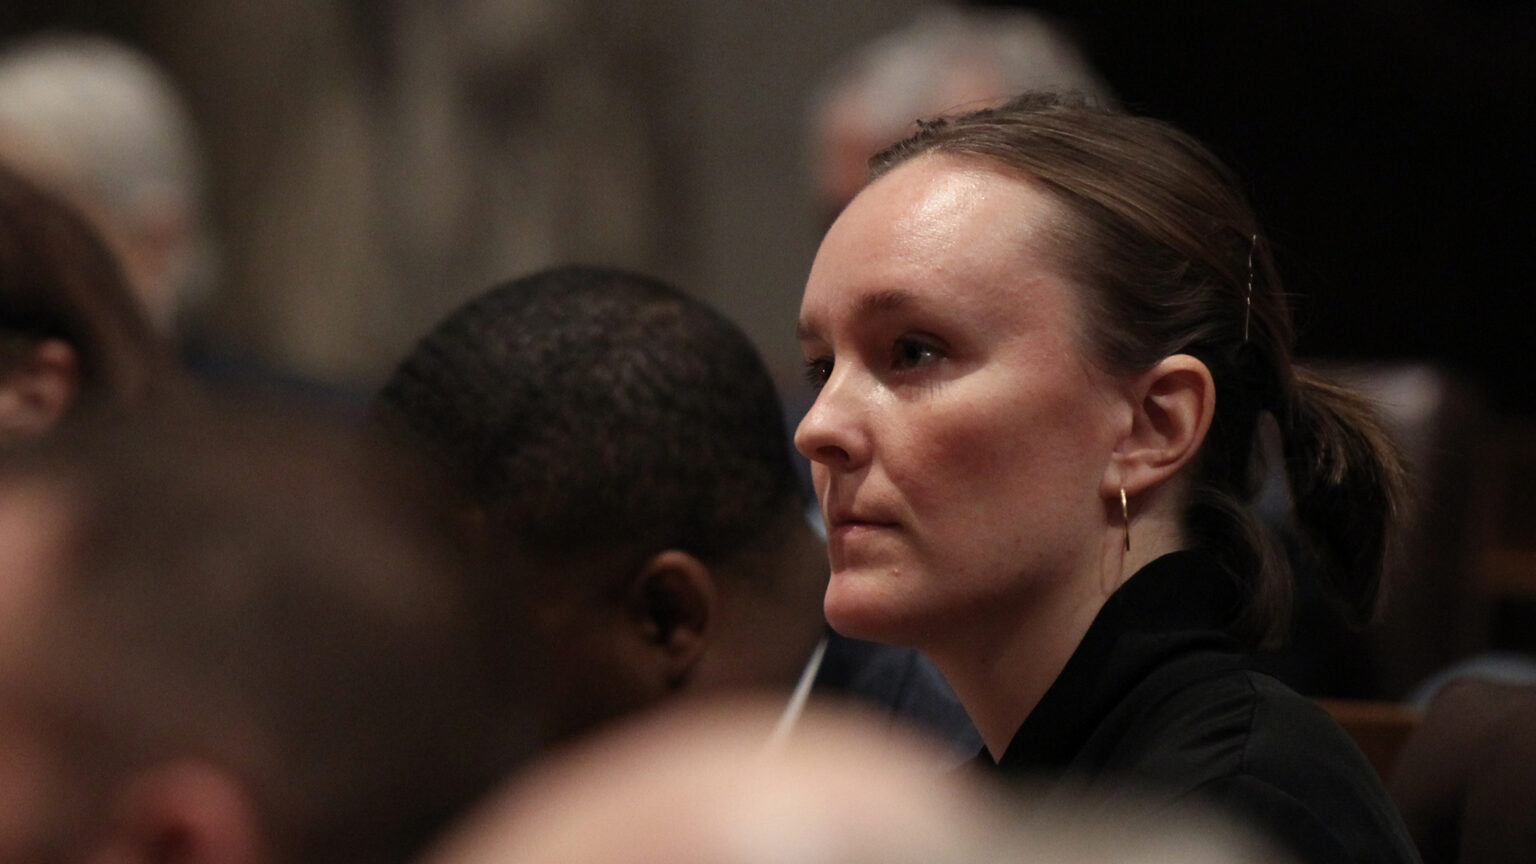 Greta Neubauer listens to a speaker while seated in a room among other people in the foreground and background.